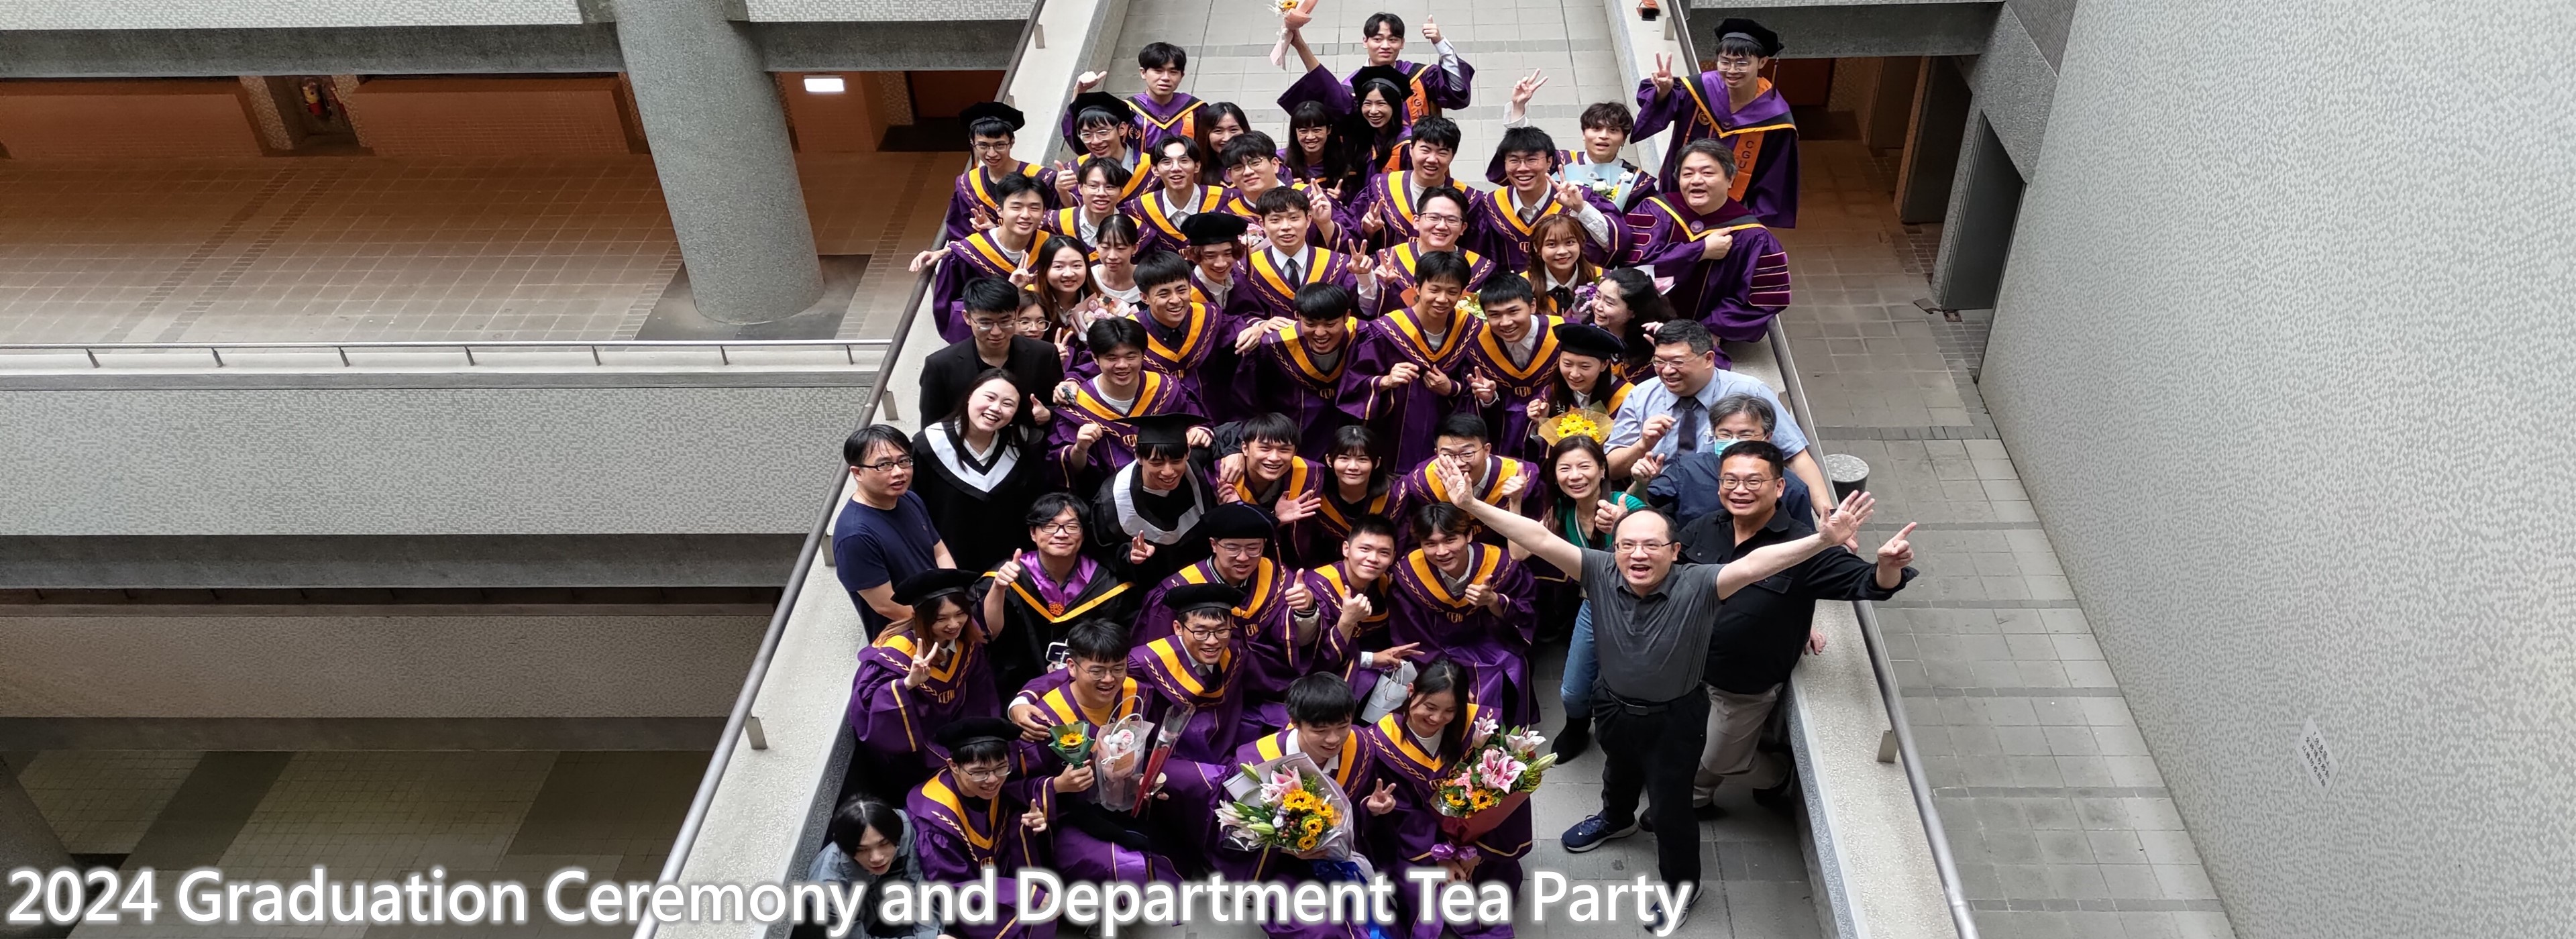 2024 Graduation Ceremony and Department Tea Party